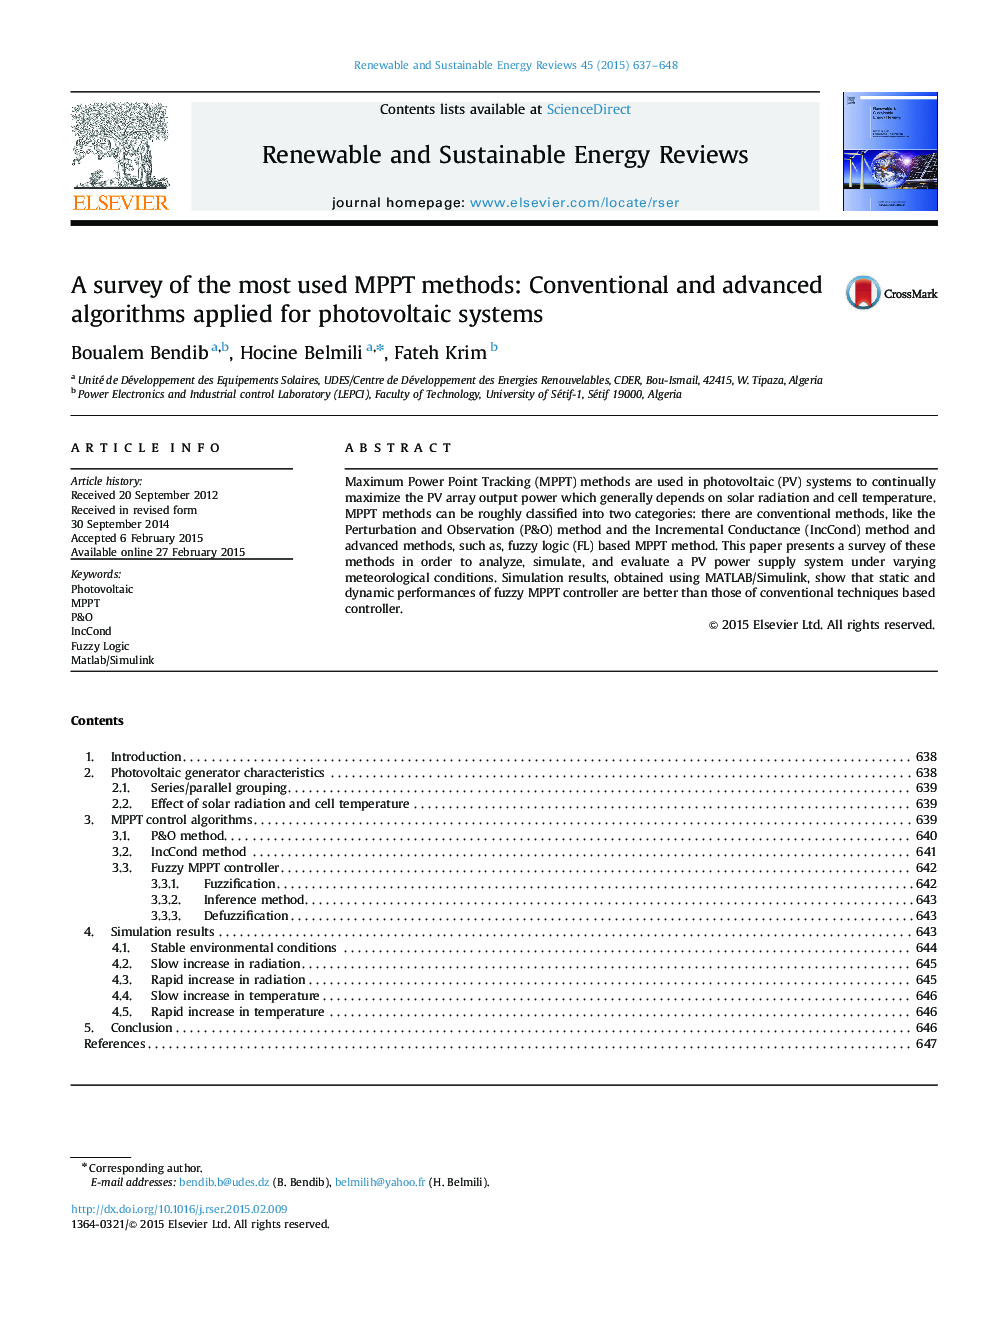 A survey of the most used MPPT methods: Conventional and advanced algorithms applied for photovoltaic systems